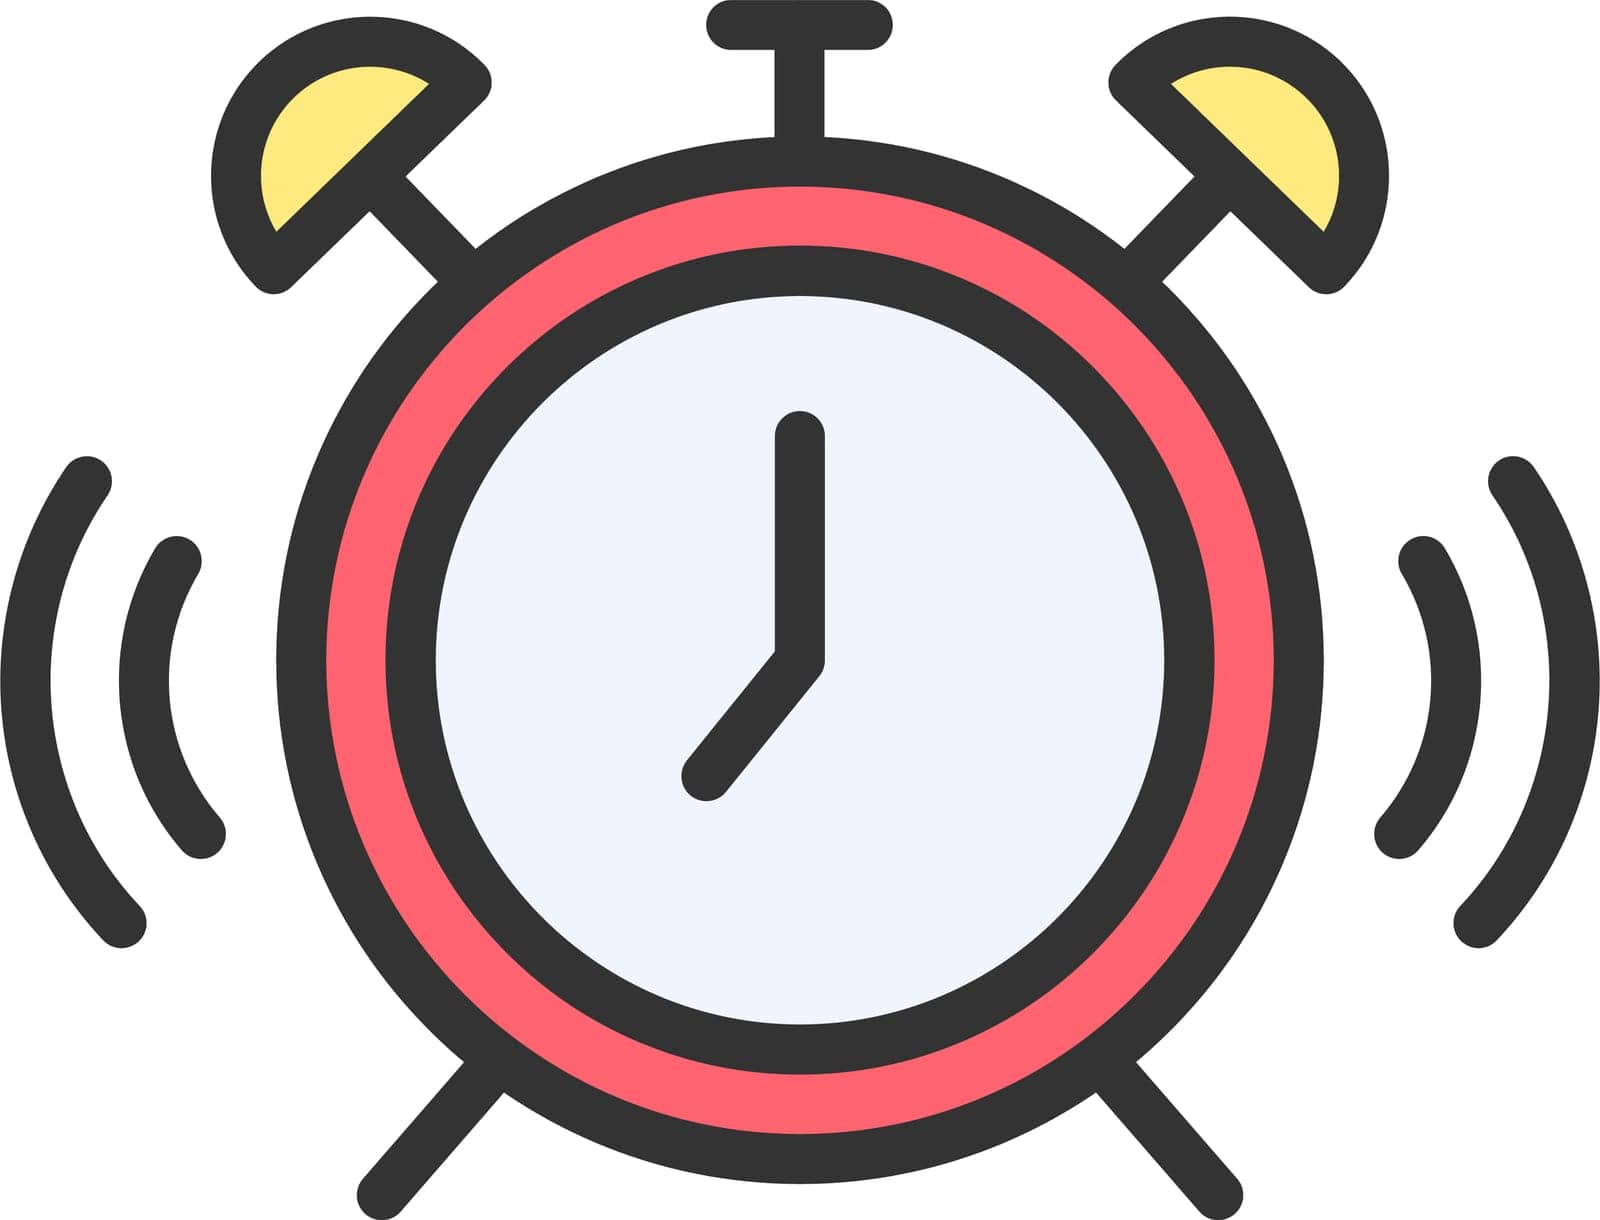 Alarm Clock Icon image. Suitable for mobile application.